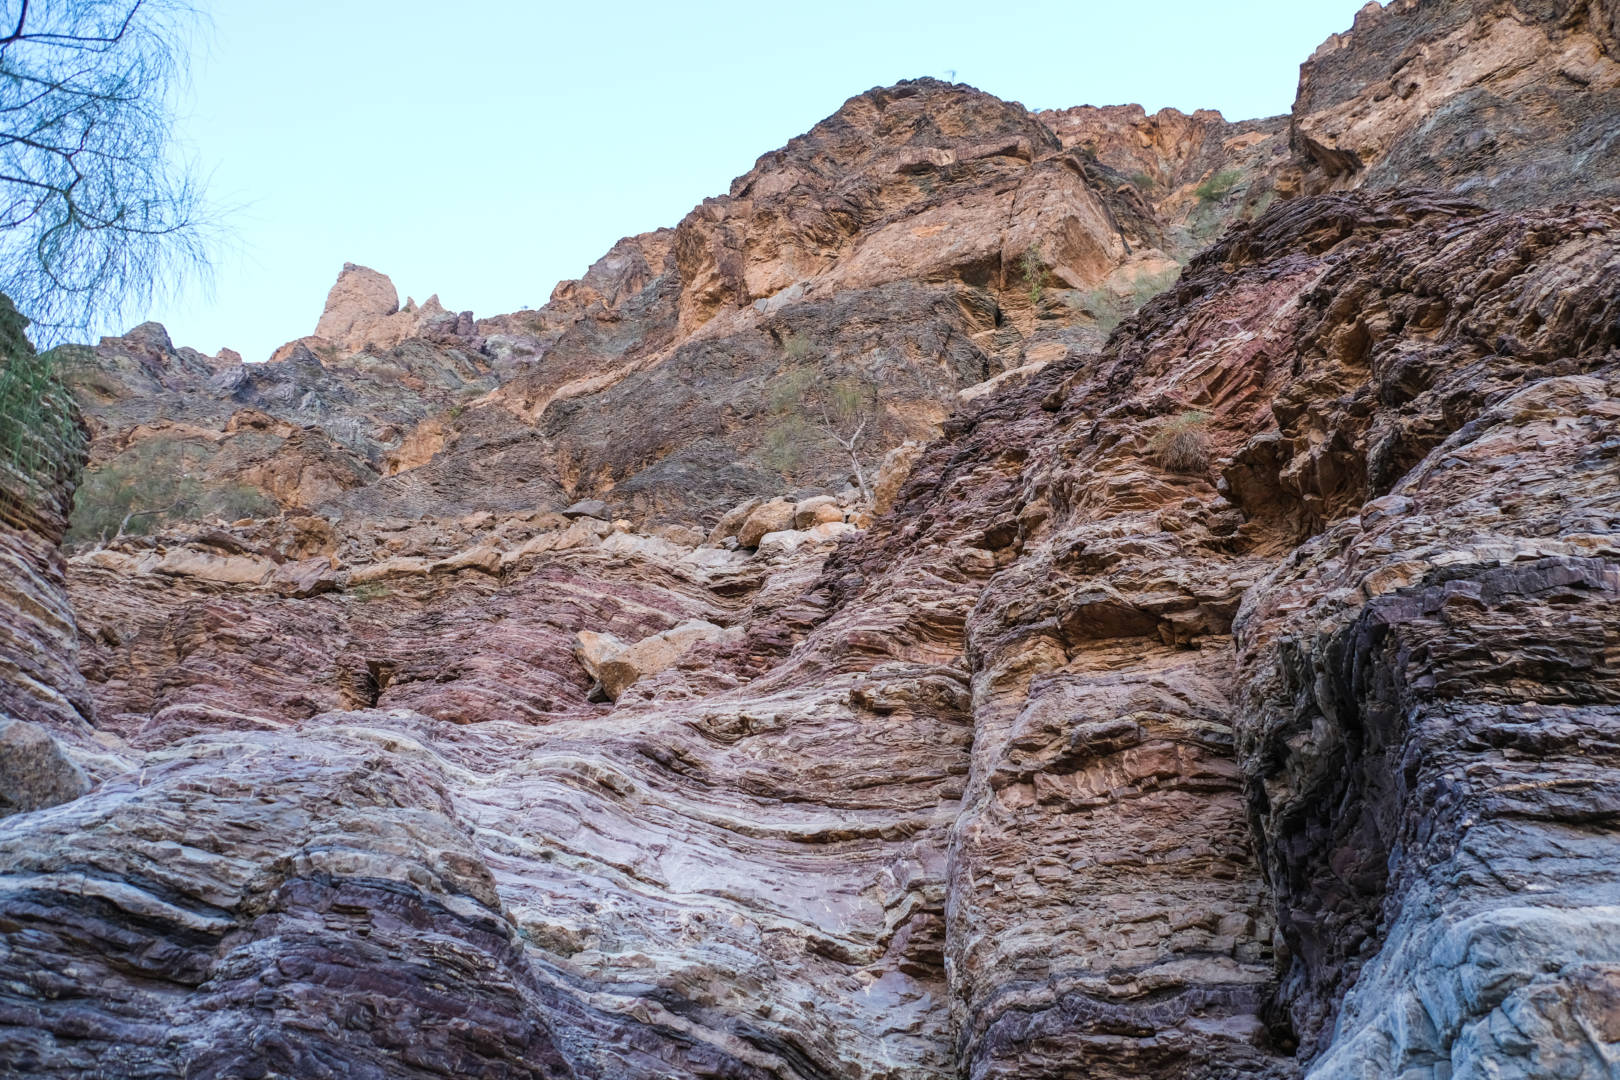 Spectrum Hike has picturesque views with its layers of rocks, a beautiful landscape, and a light breeze. Spectrum Hike is located at Wadi Ghub in Fujairah. These scenic mountains are popular for their multi-colored rock formations throughout the valley. Also known as Rainbow Mountains.